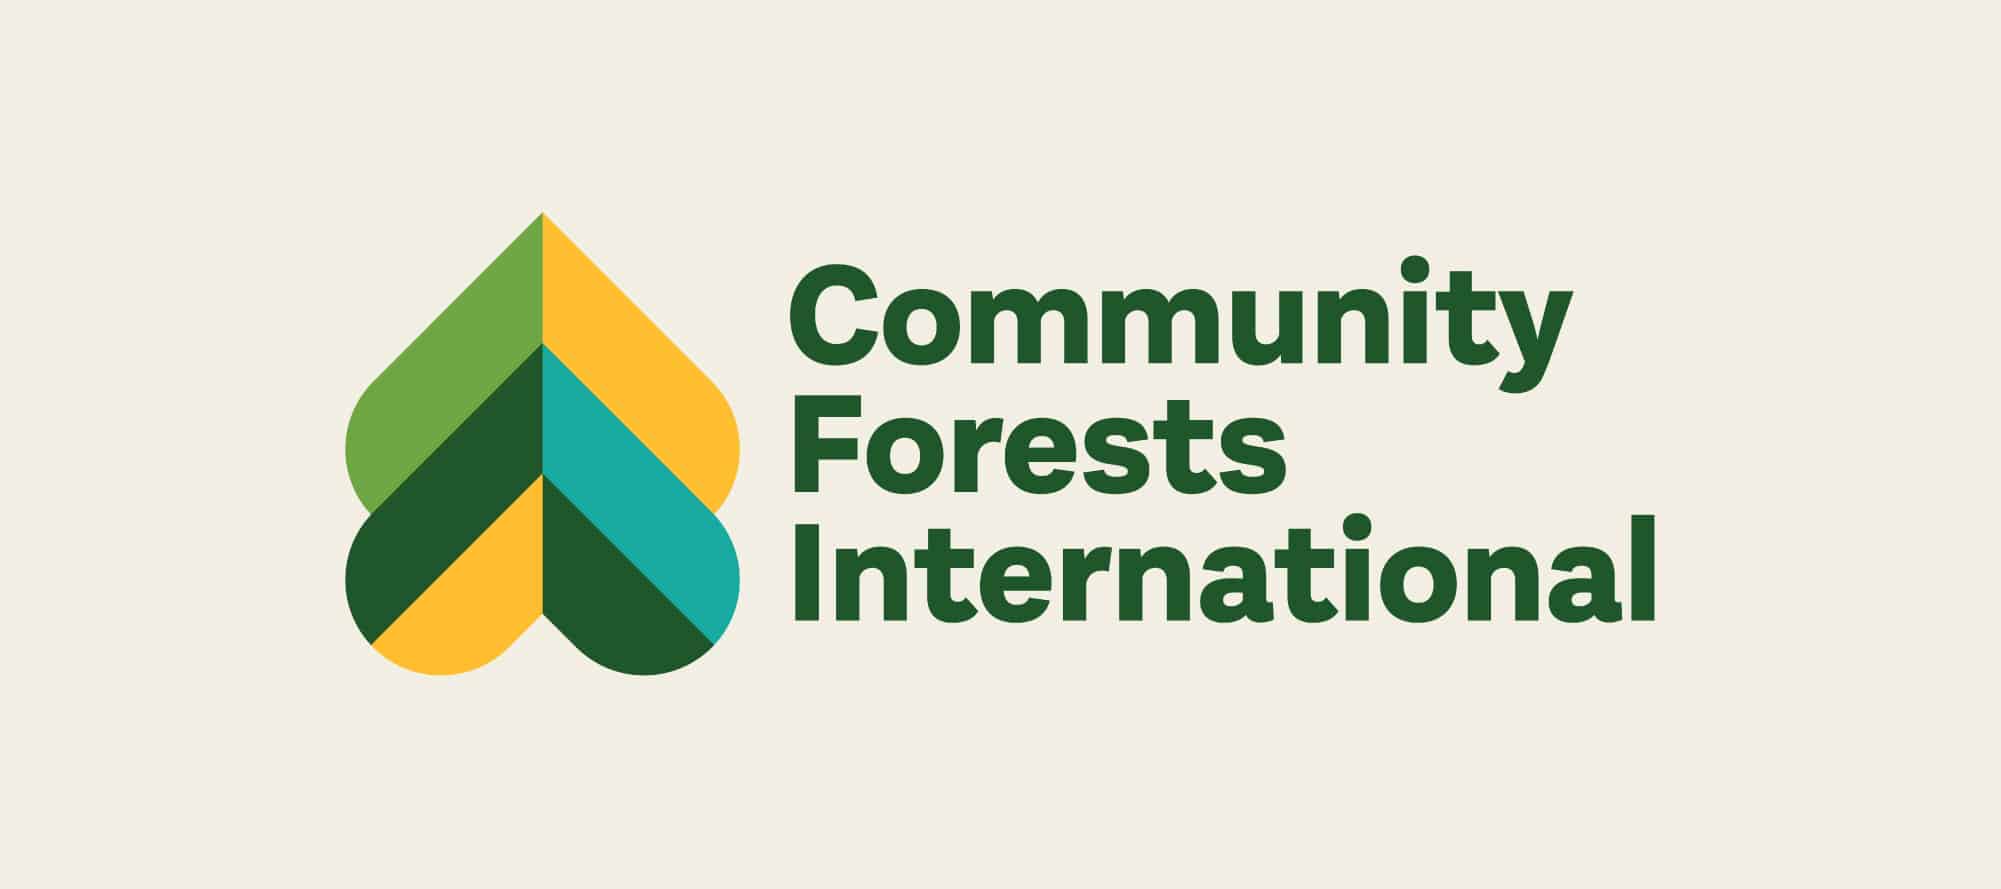 The nonprofit logo of Community Forests International, which looks like two upside-down hearts that create a tree shape.